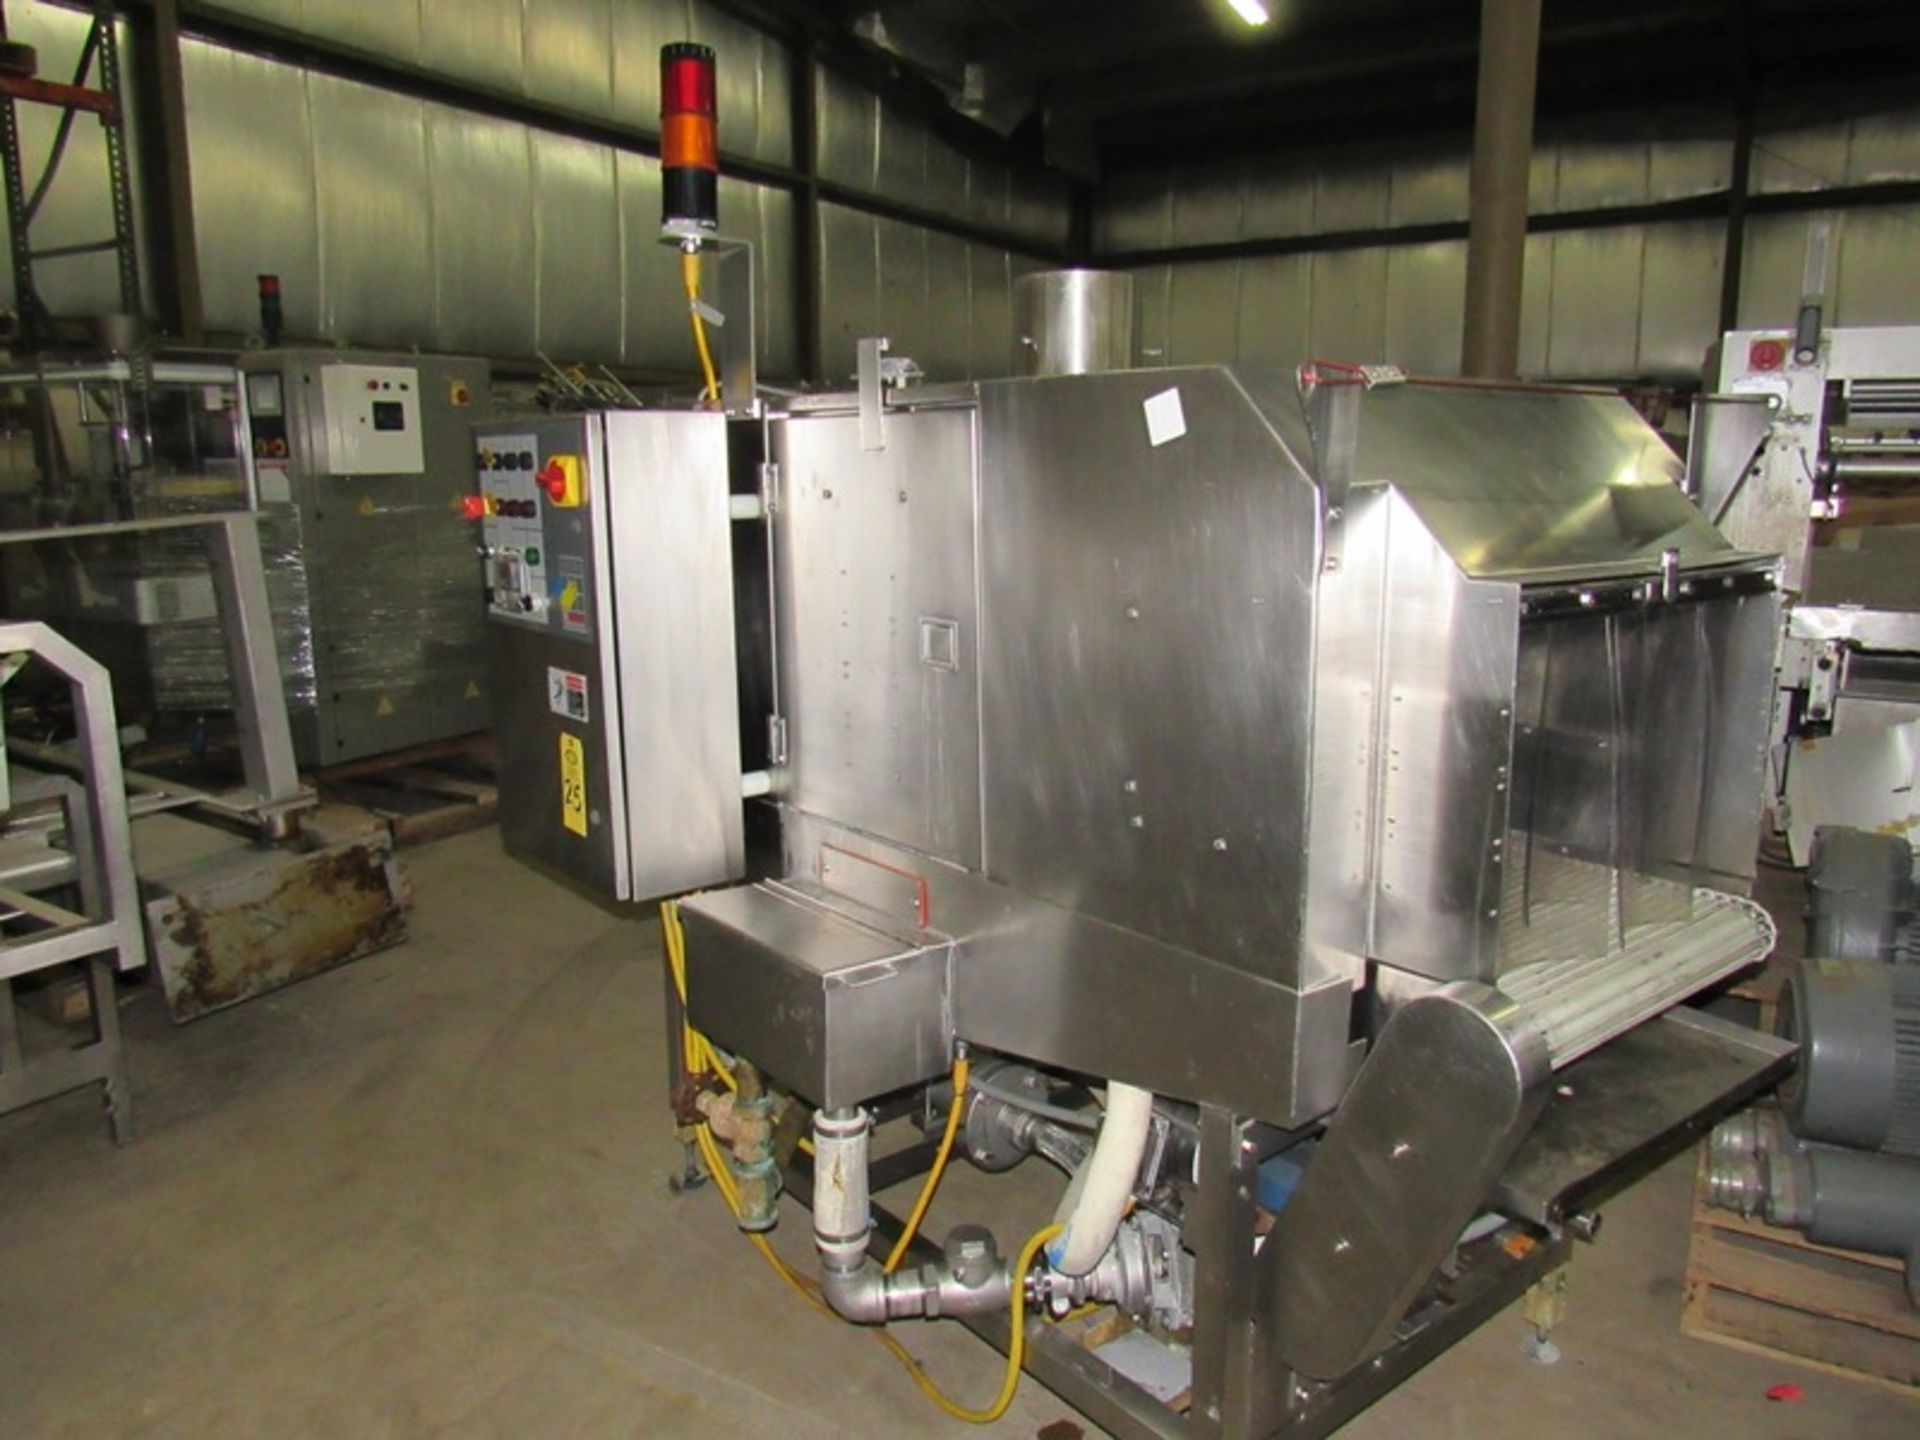 Cryovac Mdl. ST101 Stainless Steel Hot Water/Steam Shrink Tunnel, 24" W X 7' L X 16" T tunnel,